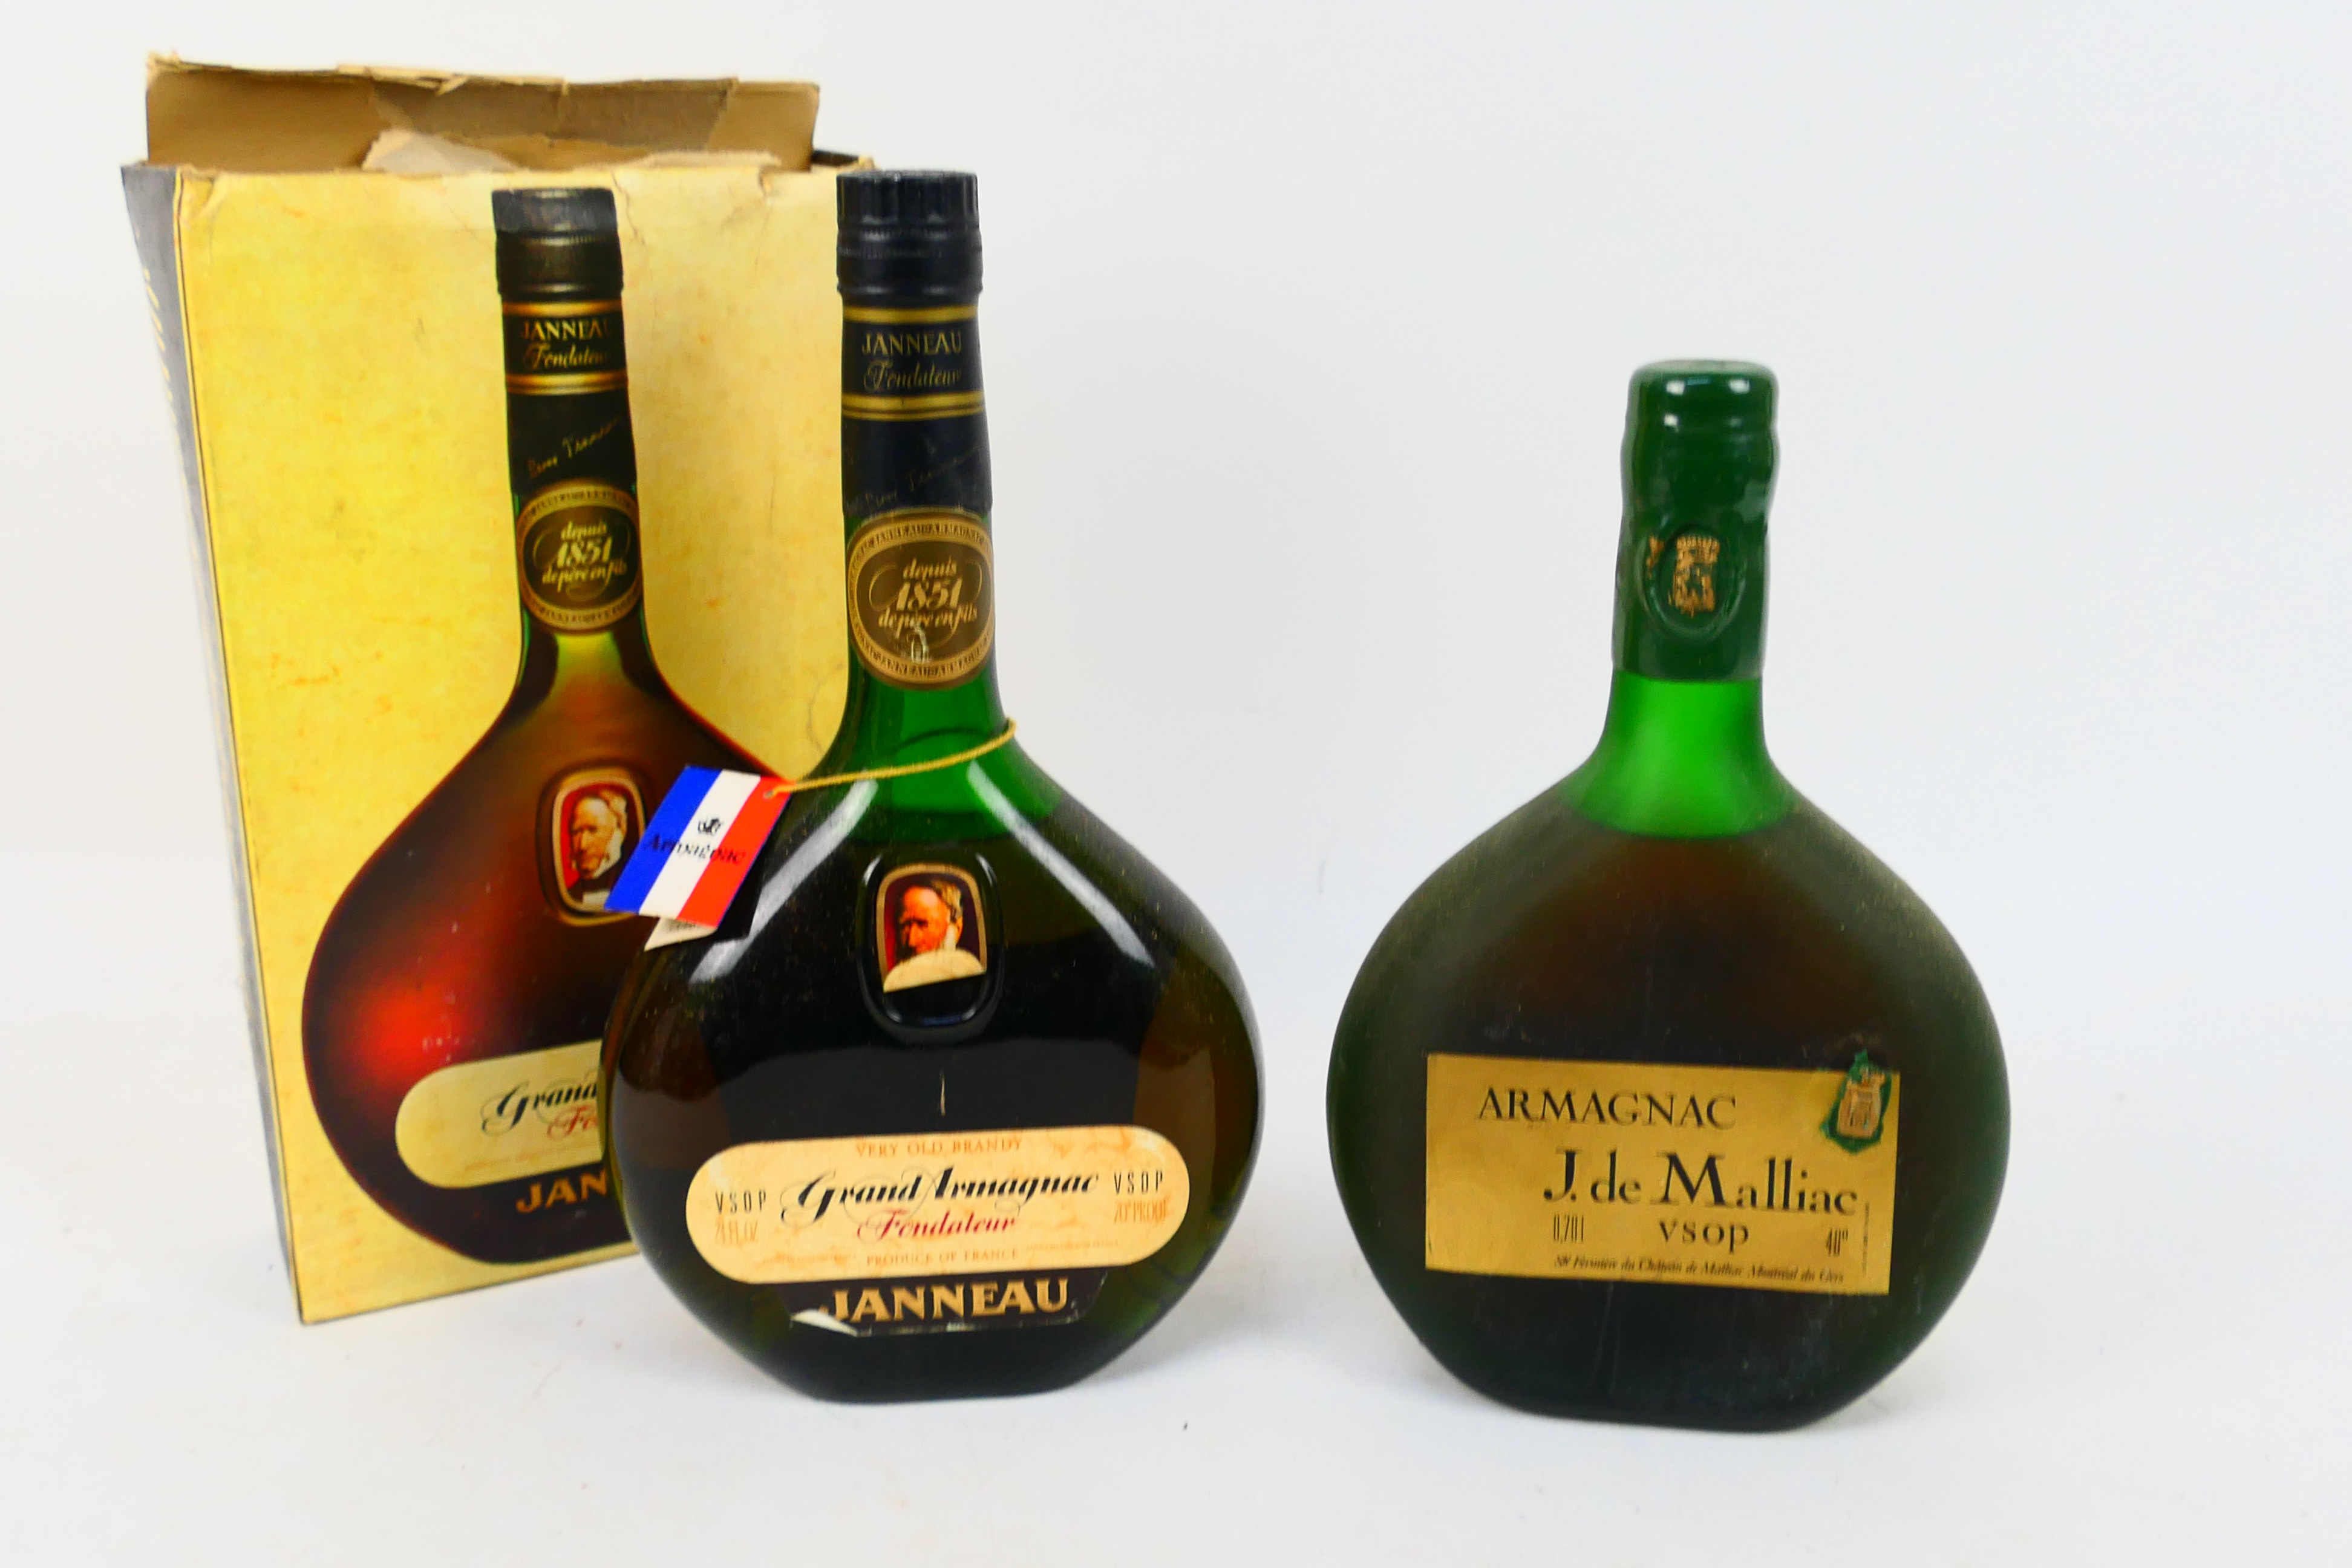 A 1970's bottling of Janneau Grand Armag